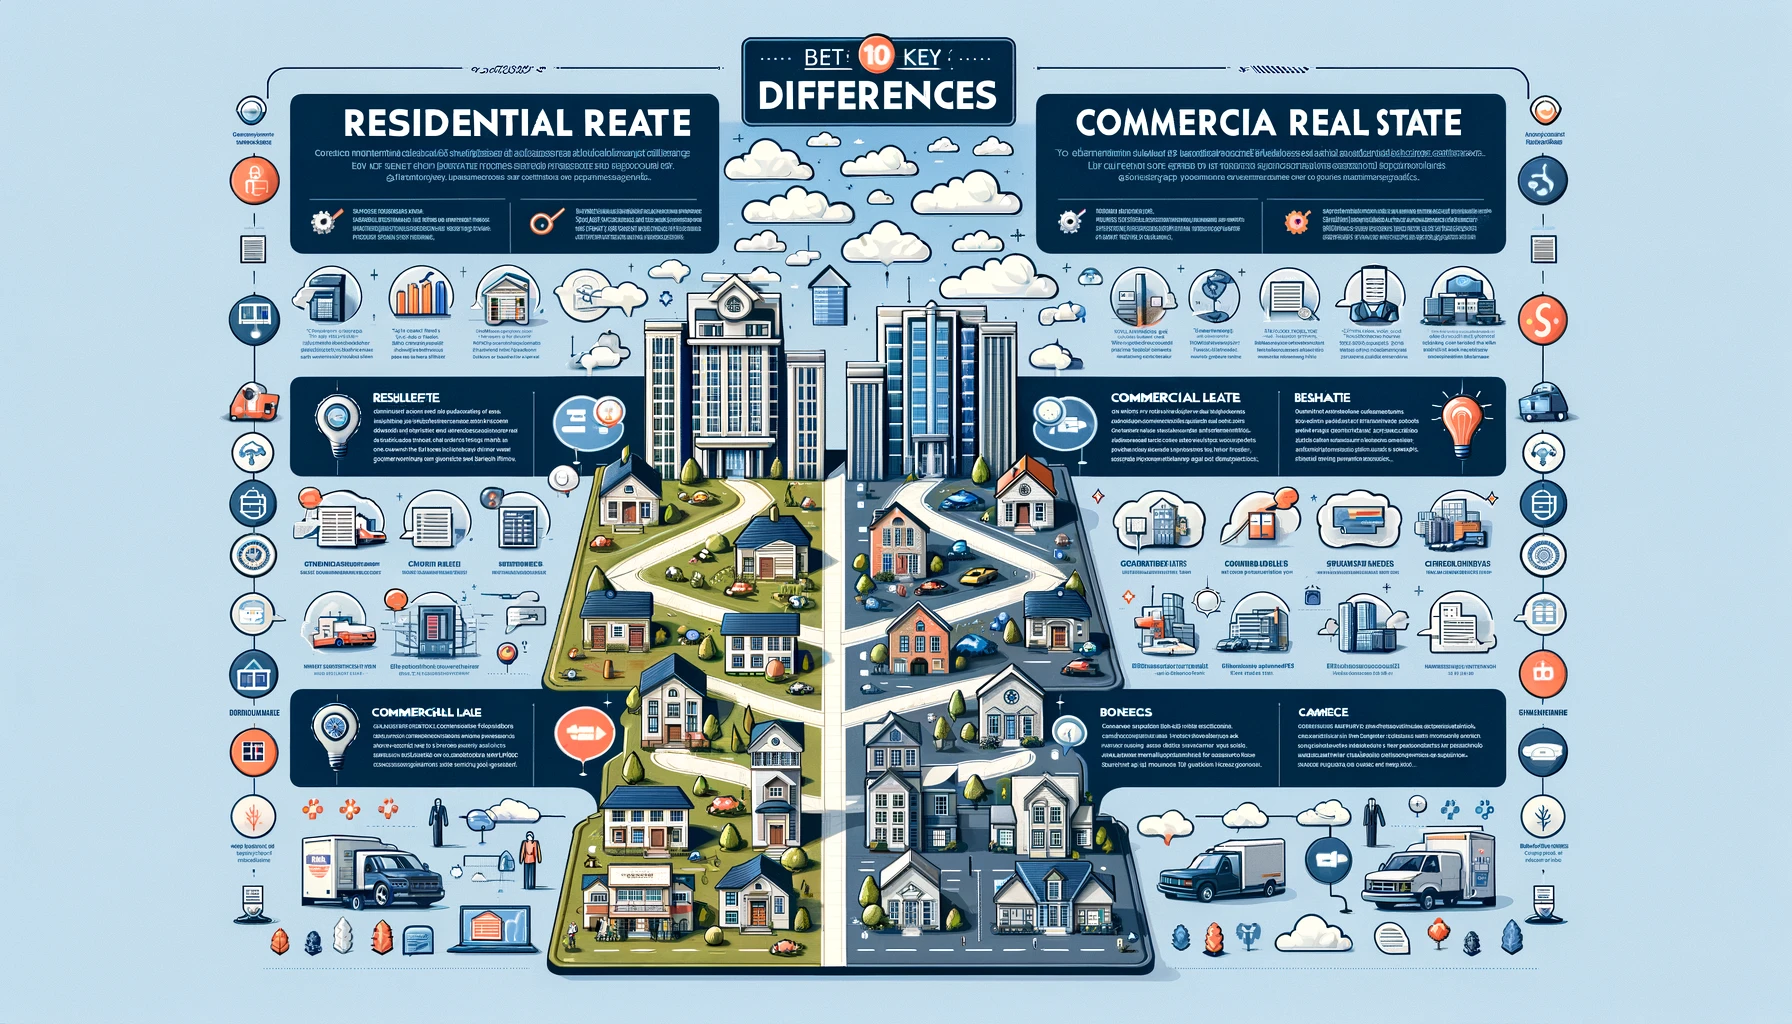 10 Key Differences Between Residential and Commercial Real Estate